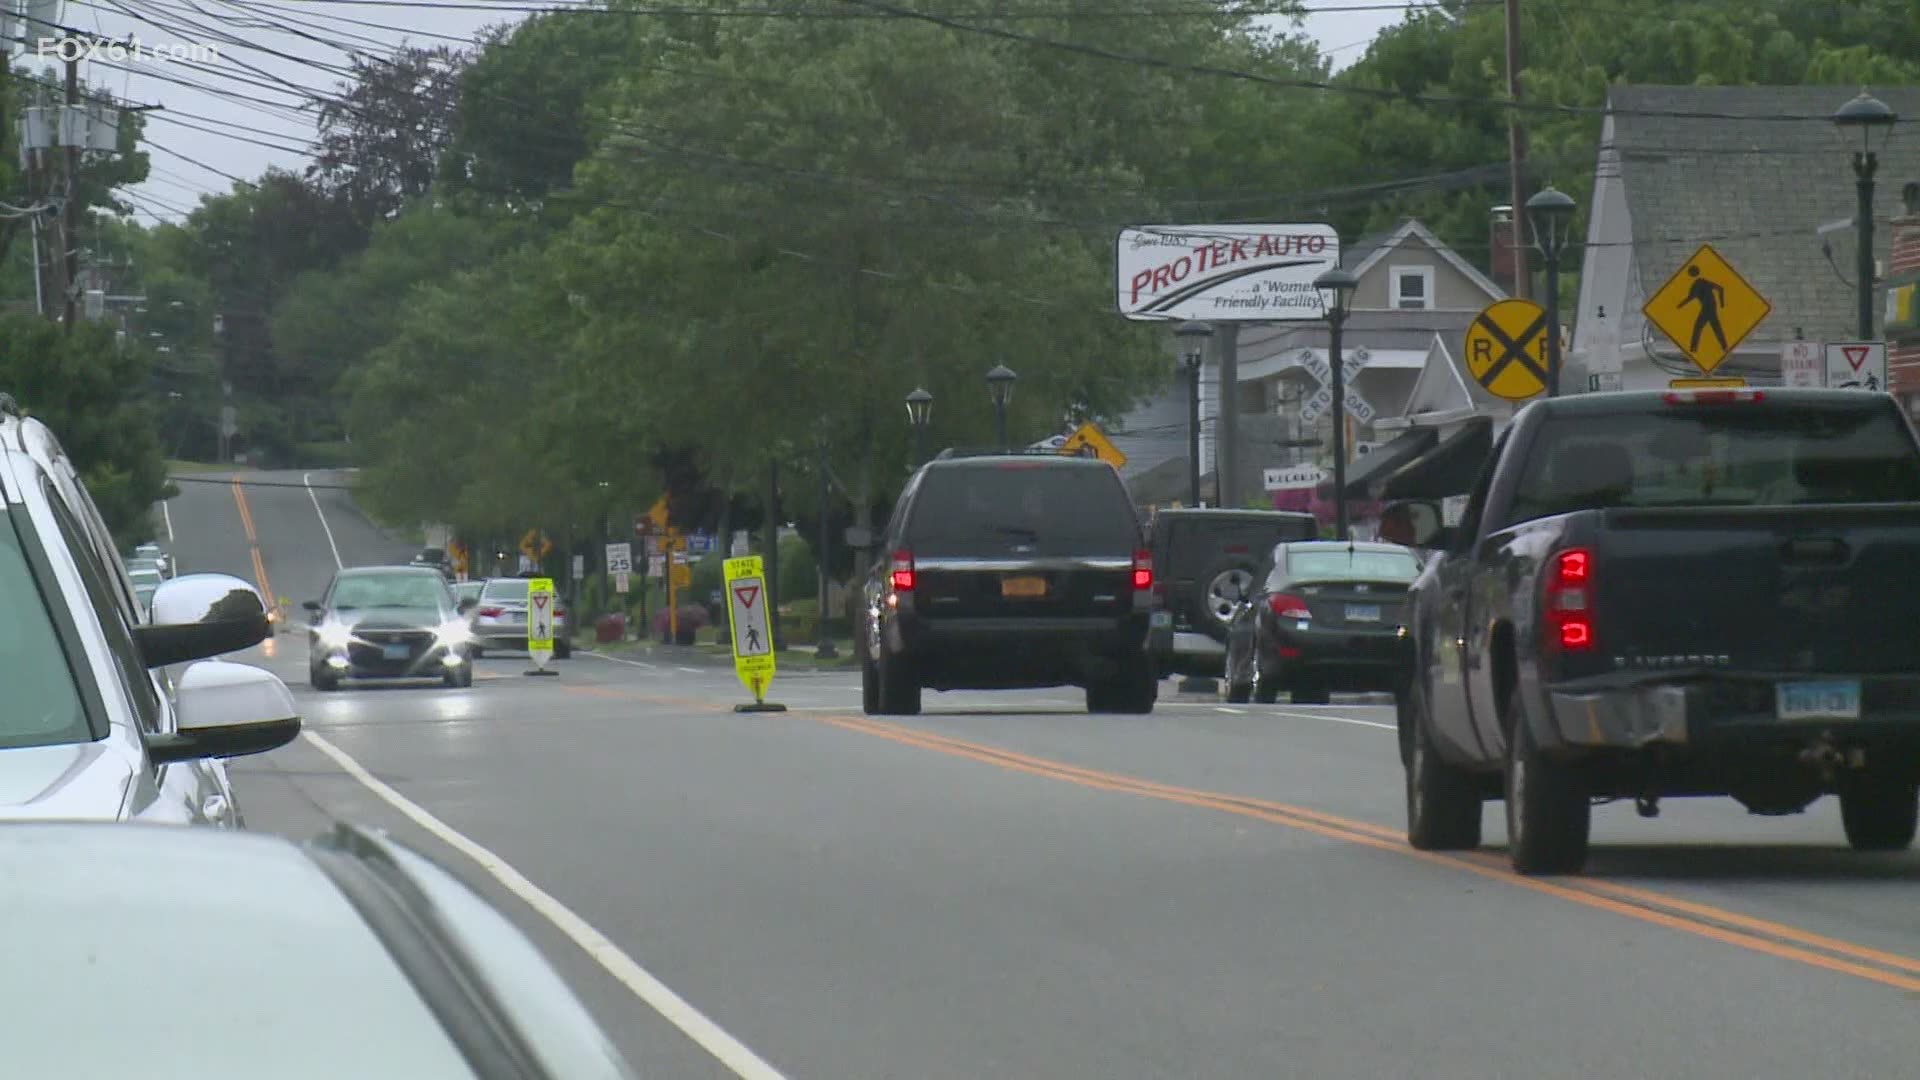 Niantic restaurants were hoping that this 4th of July weekend would bring in business but Friday was a washout.